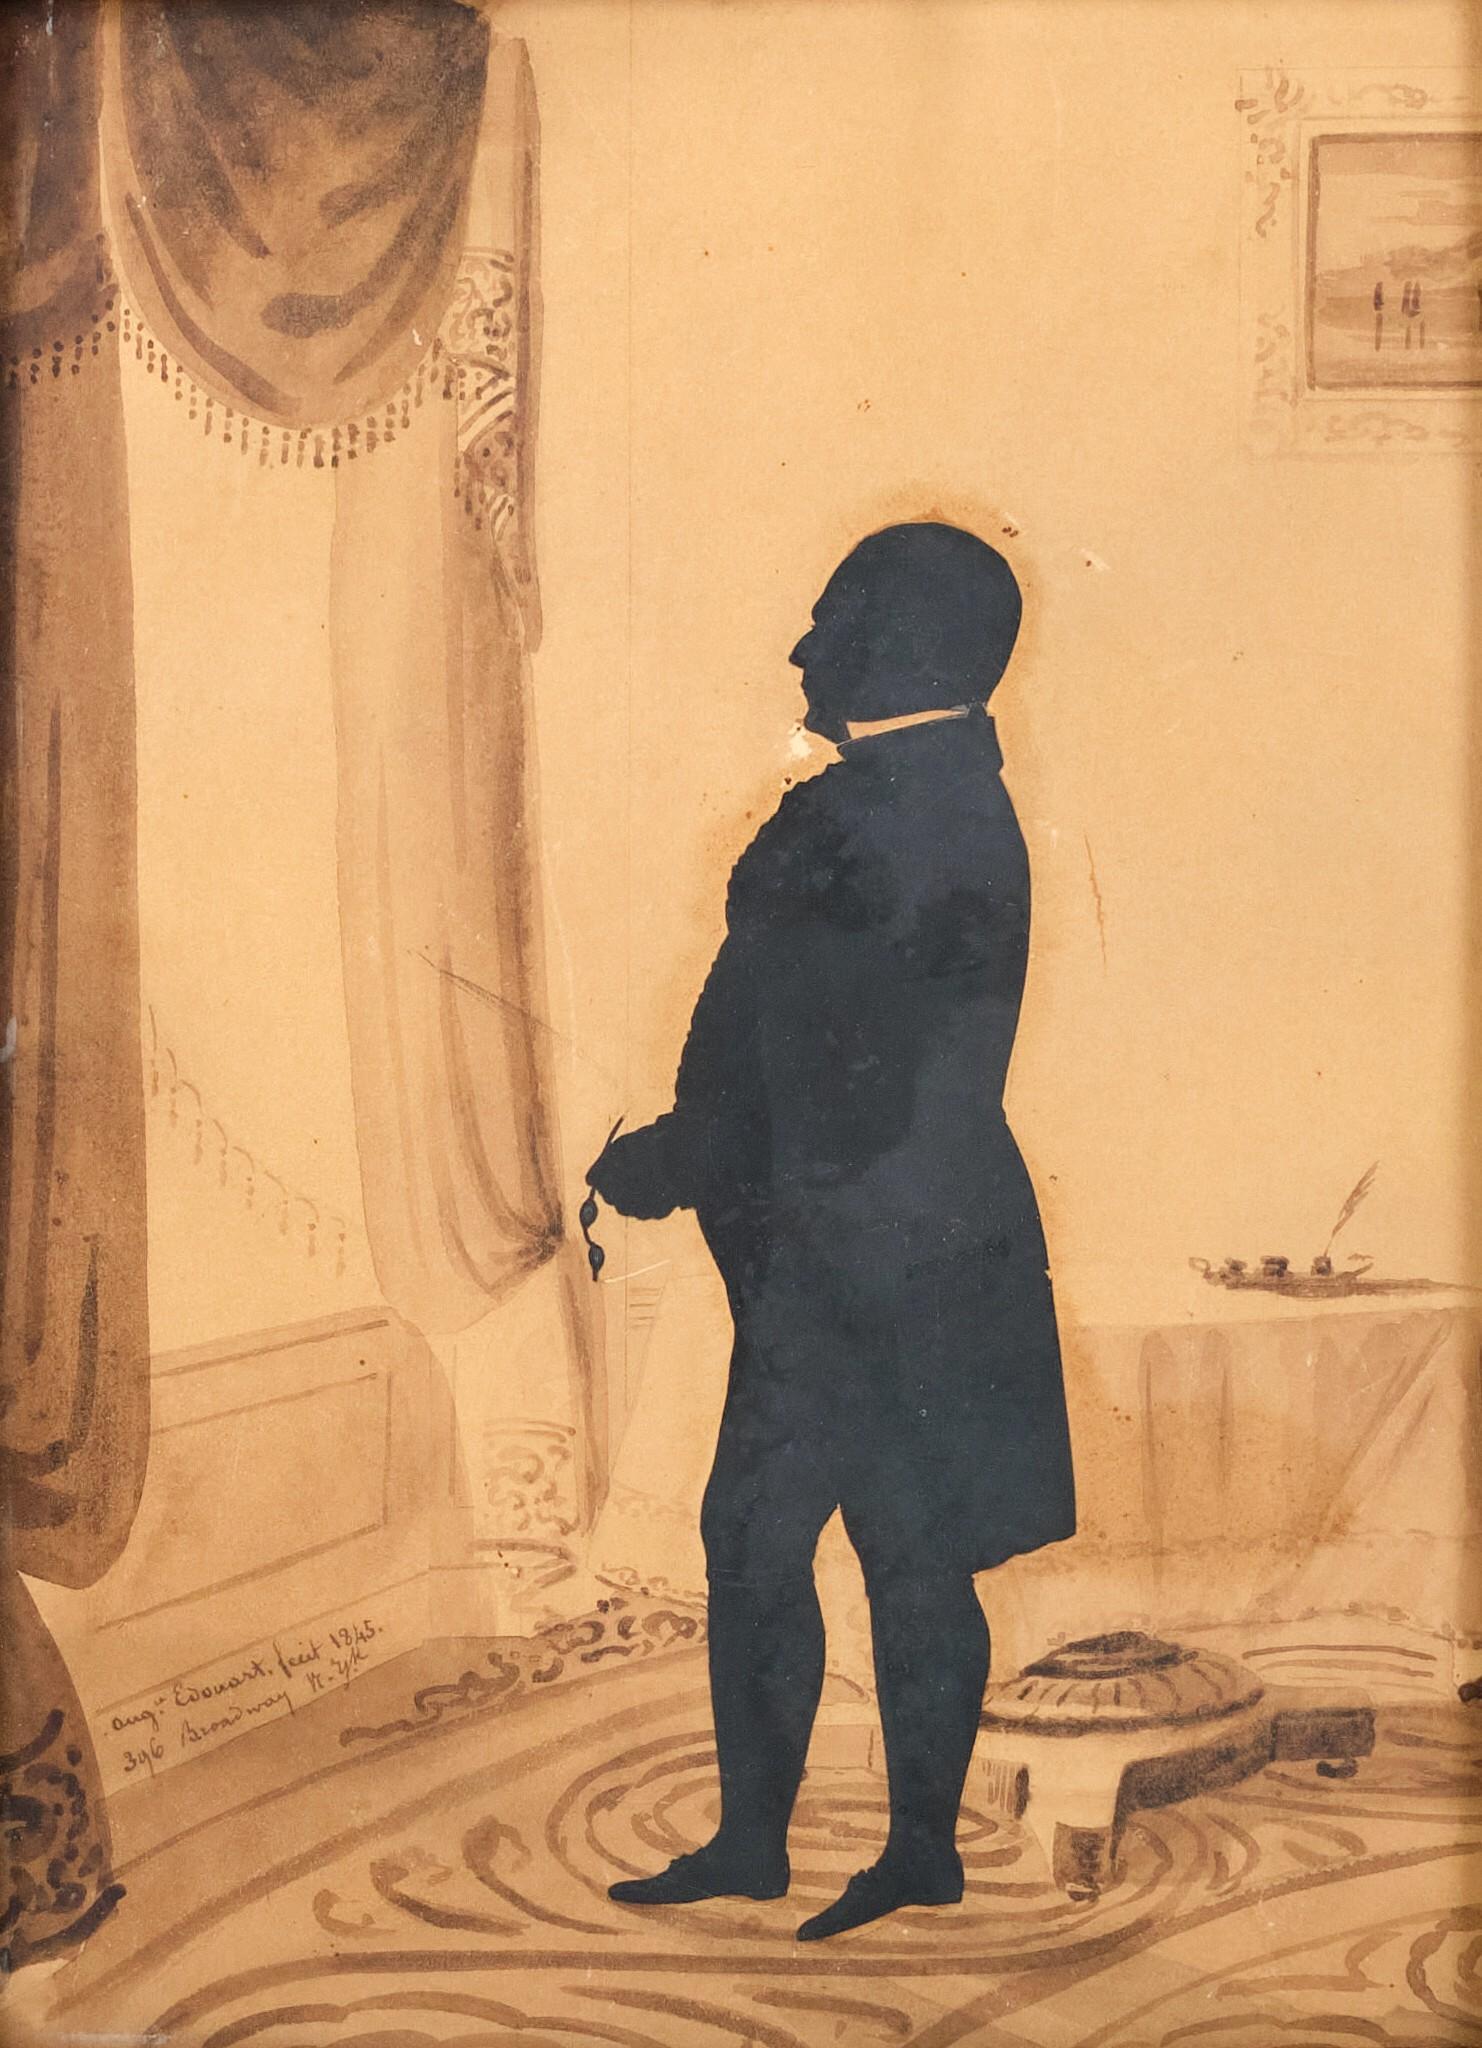 A very good 19th century American Classical Period / Empire Period scissor-cut silhouette by Auguste Edouart, depicting the full length figure of a prominent New York gentleman with spectacles in hand, gazing out the window from a partially